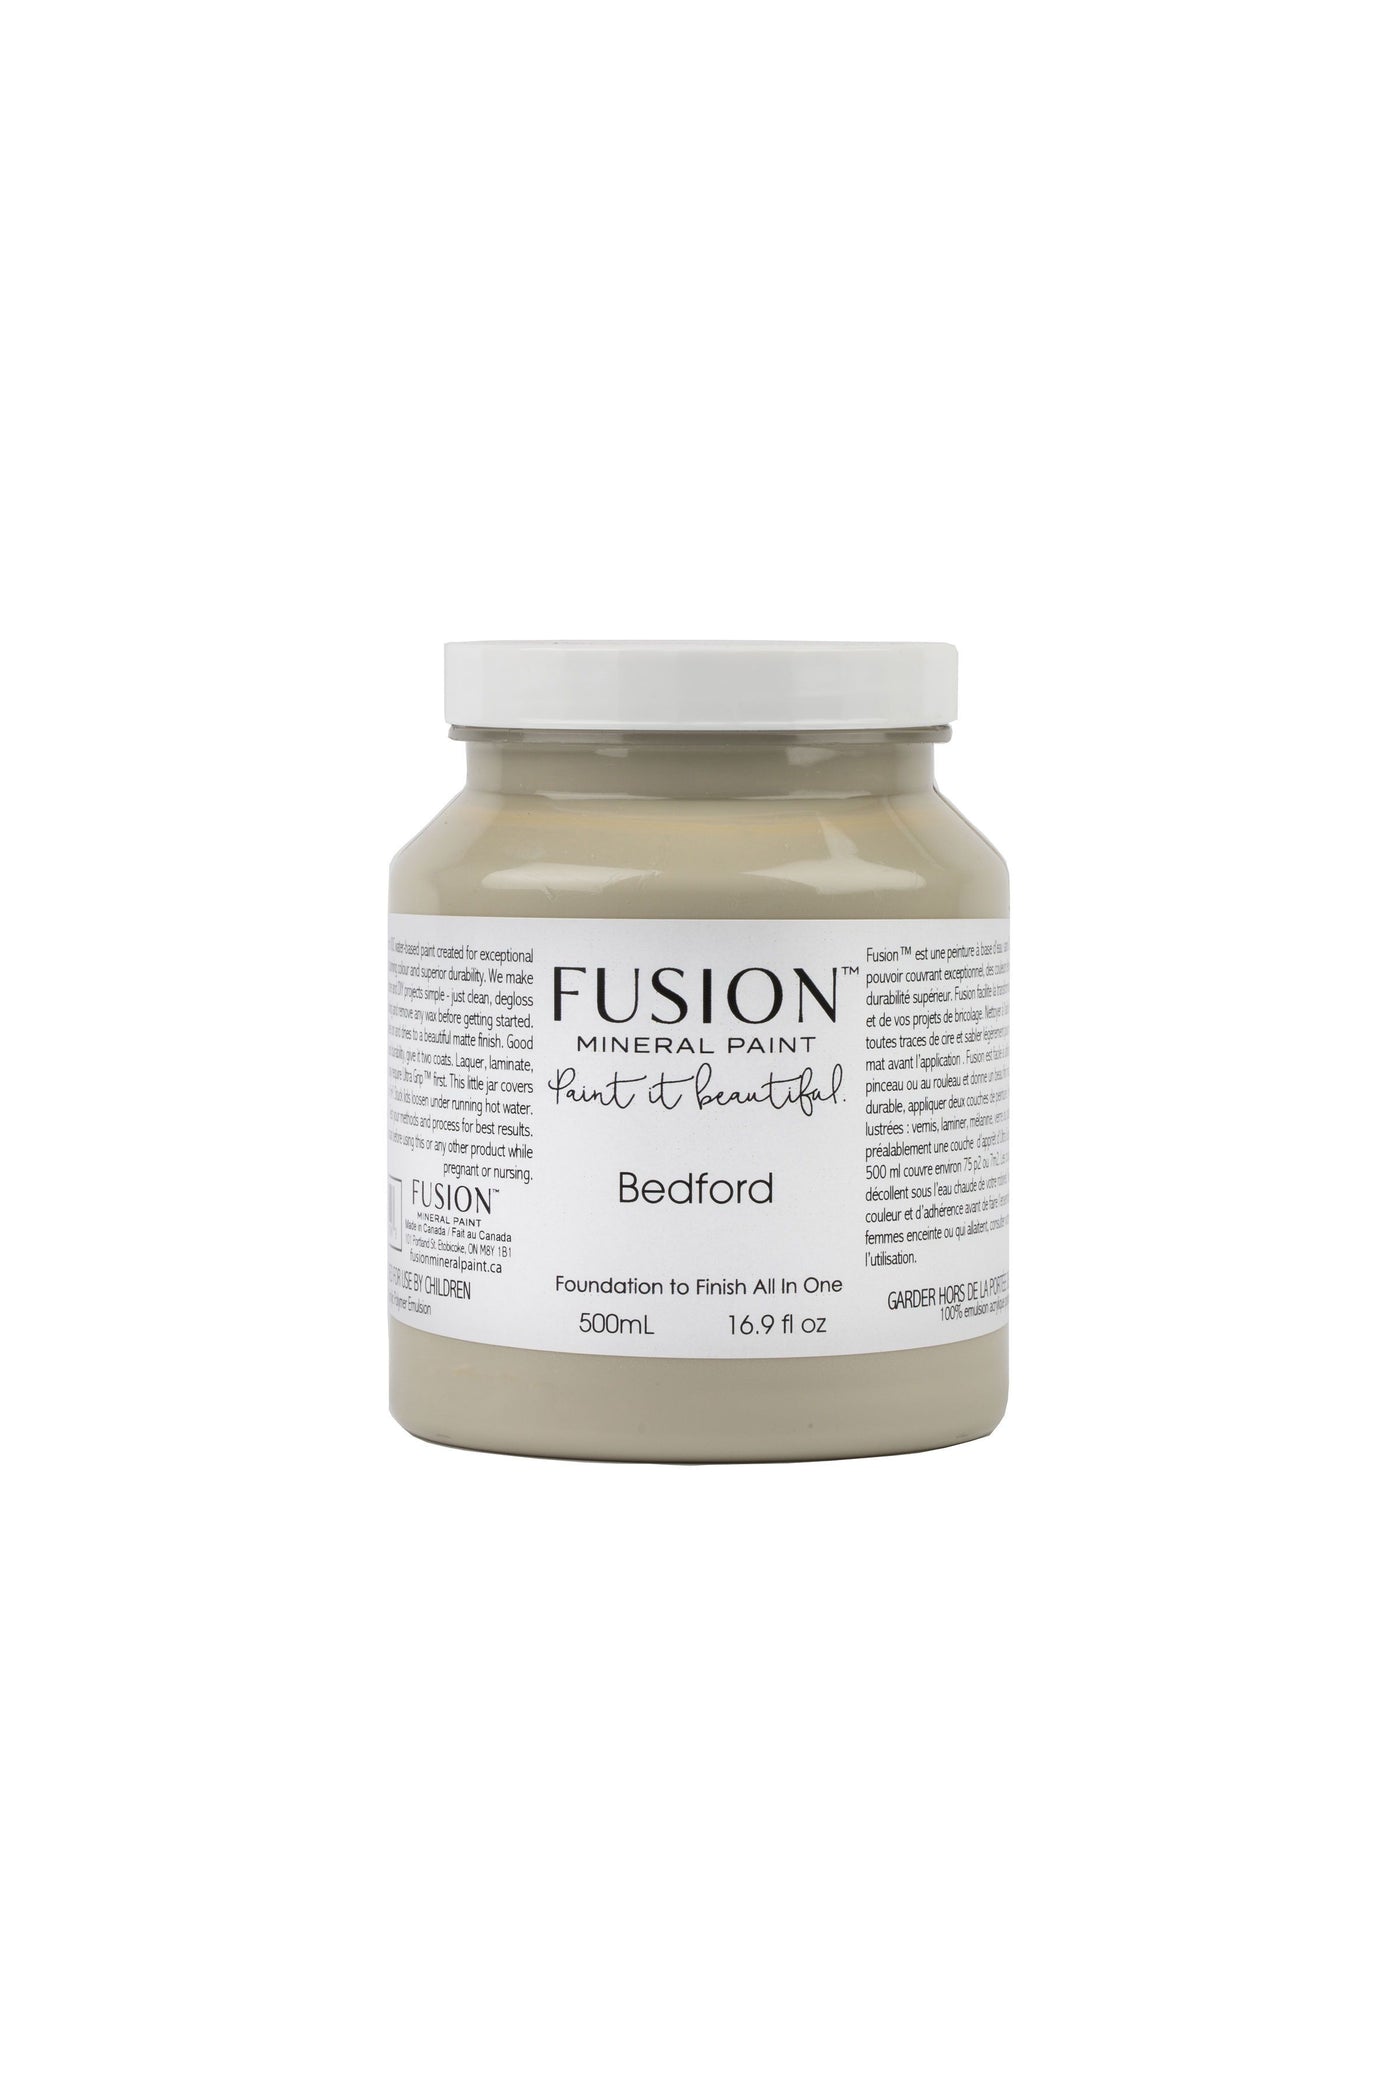 Paint it Beautiful Bedford neutral green/grey Fusion Mineral Paint 500ml at For the Love Creations